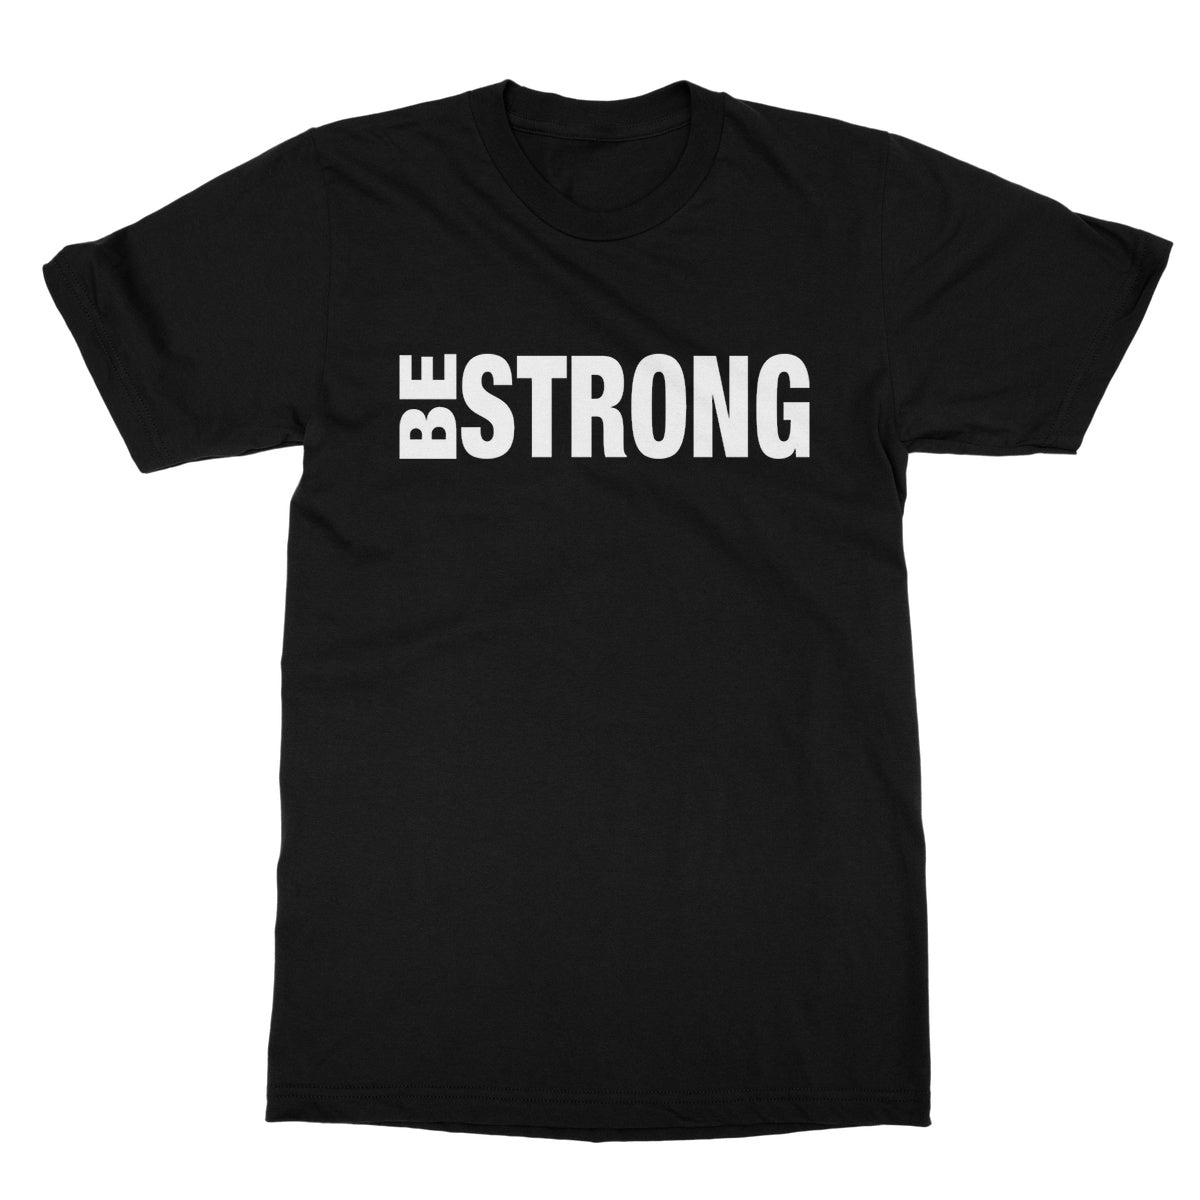 Be Strong T-Shirt